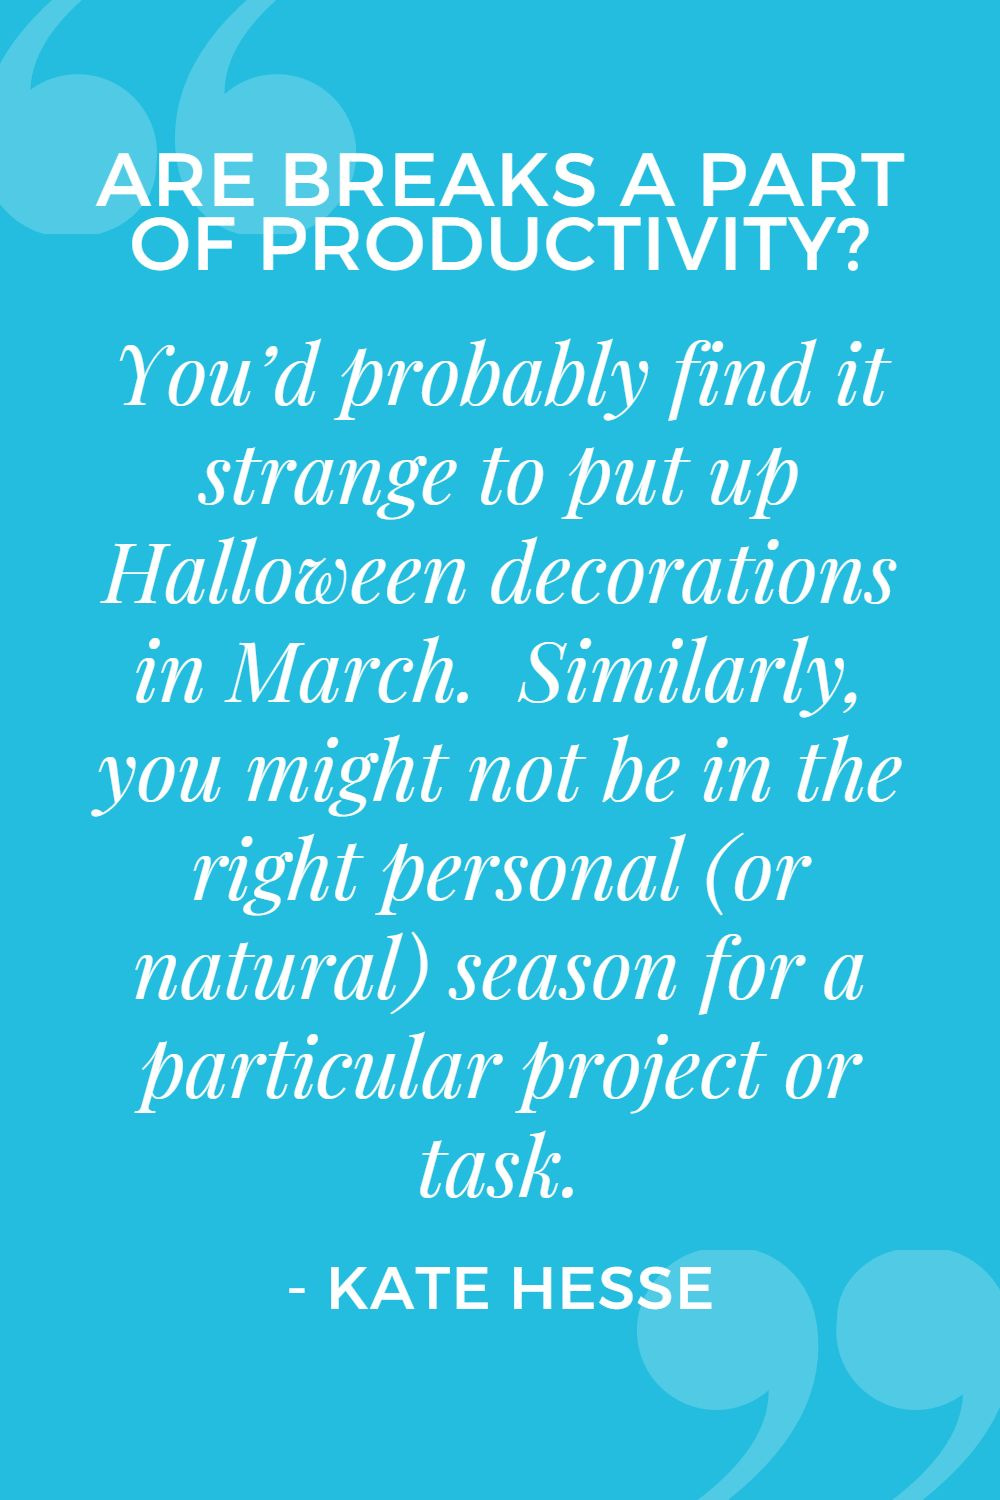 You'd probably find it strange to put up Halloween decorations in March. Similarly, you might not be in the right personal (or natural) season for a particular project or task.